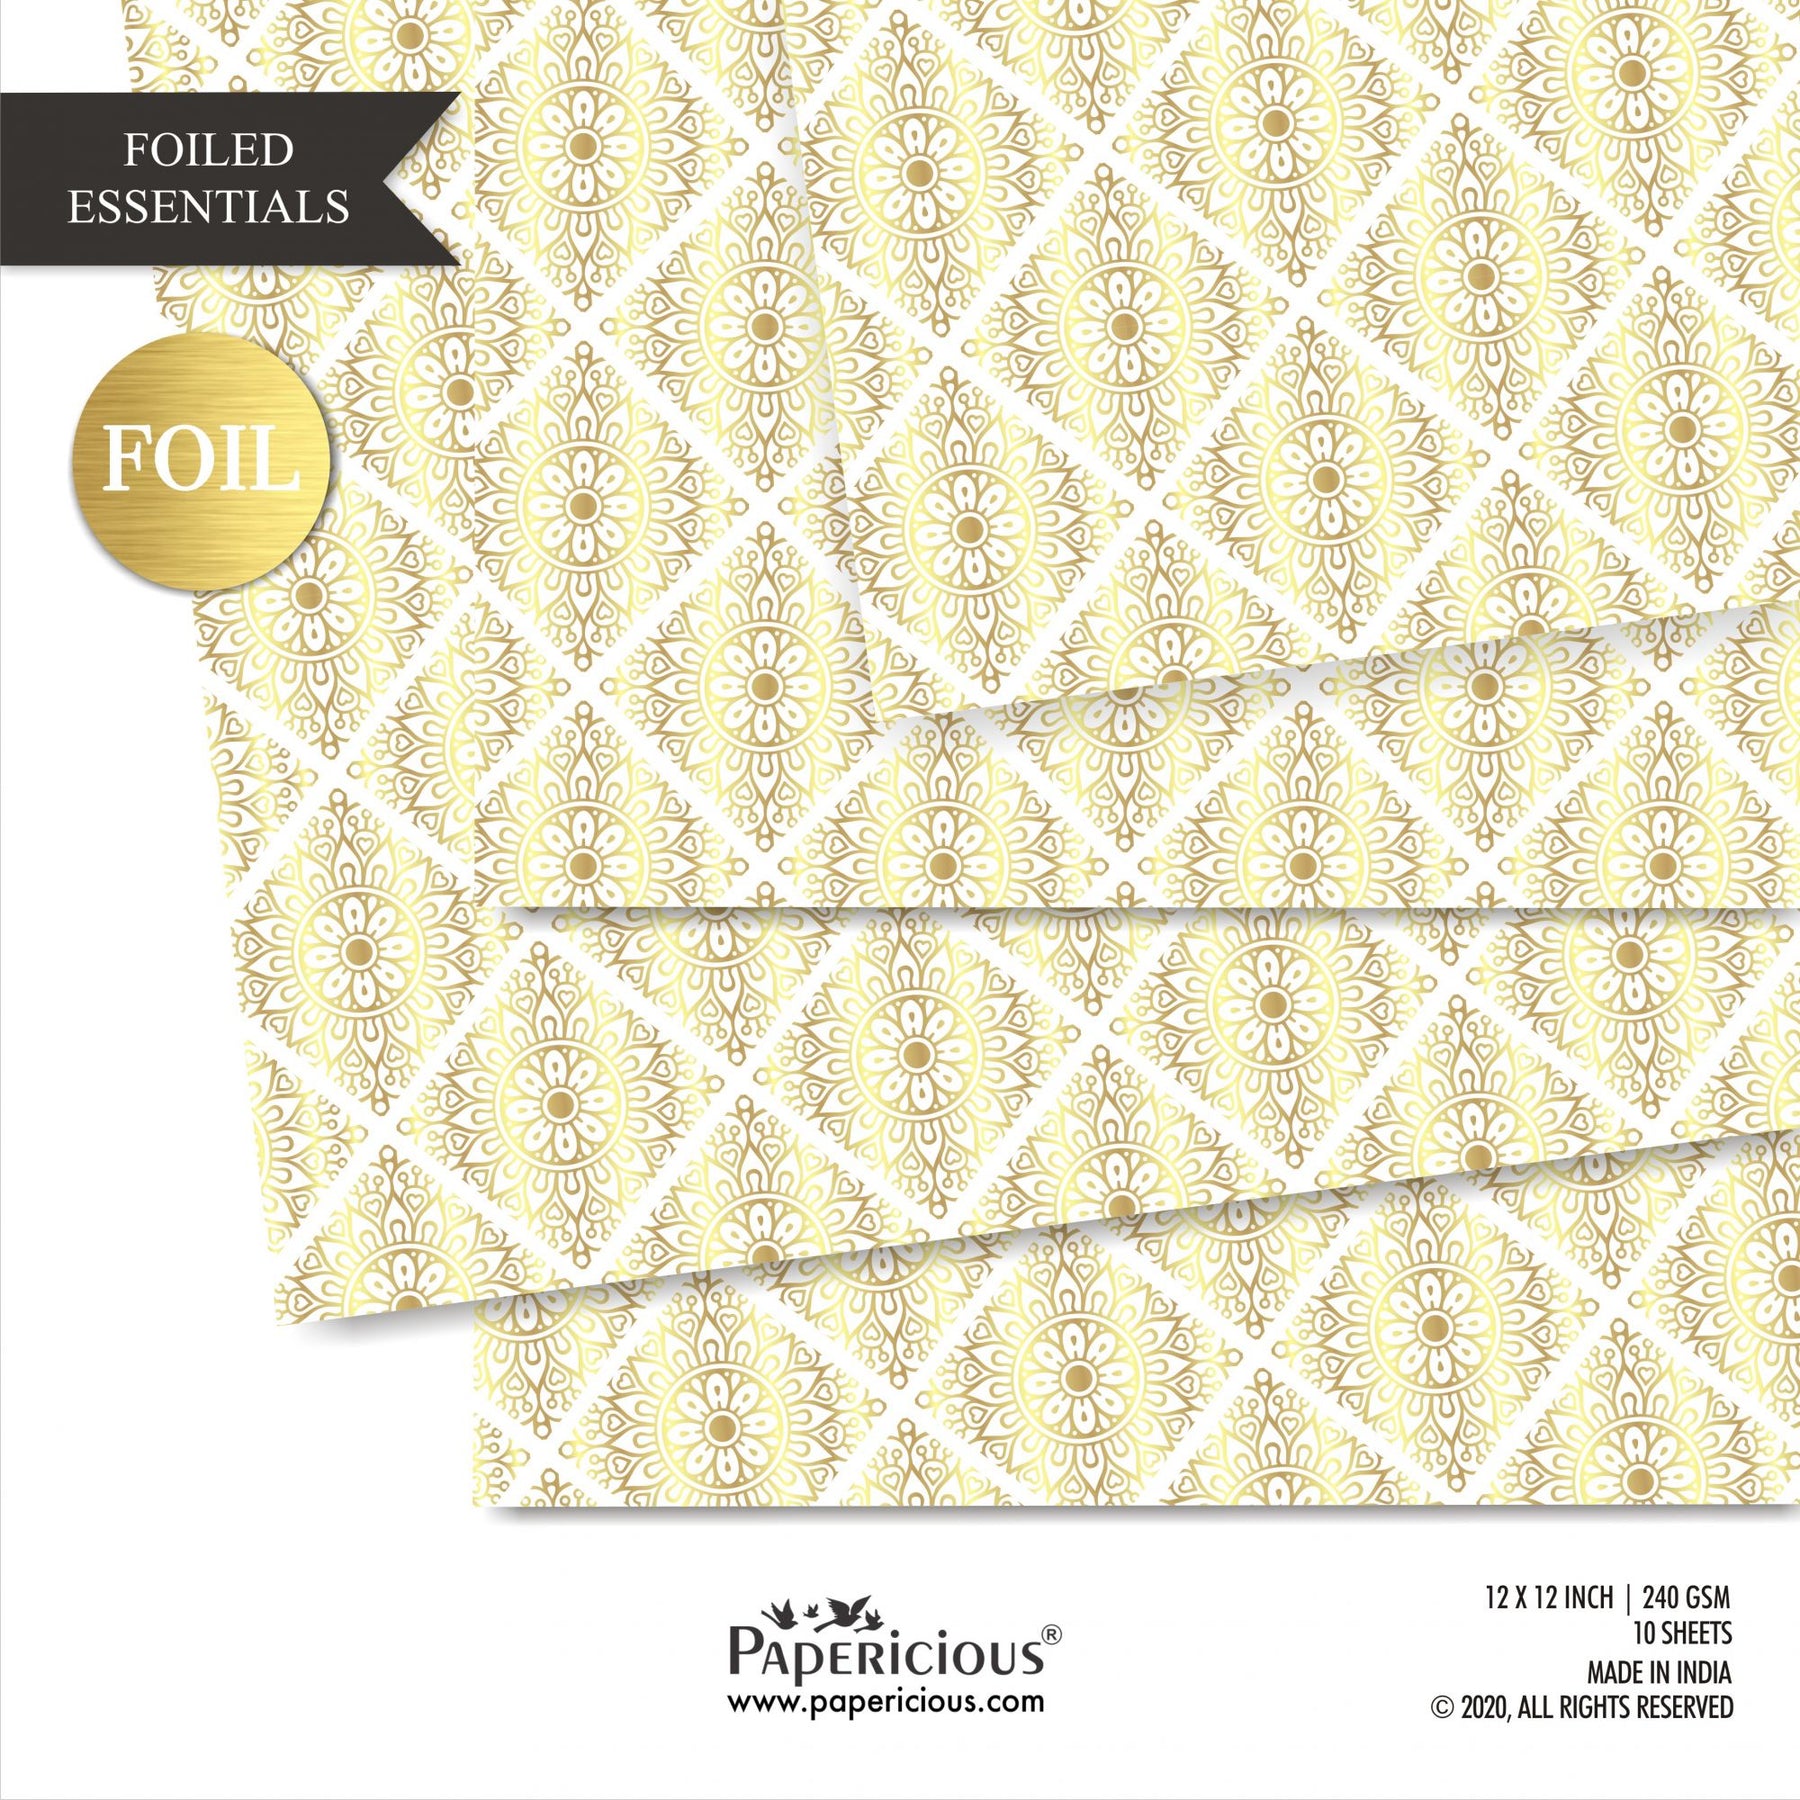 Papericious - Golden Foiled Pattern Scrapbook Papers 12x12 inch / 10 sheets / #12518